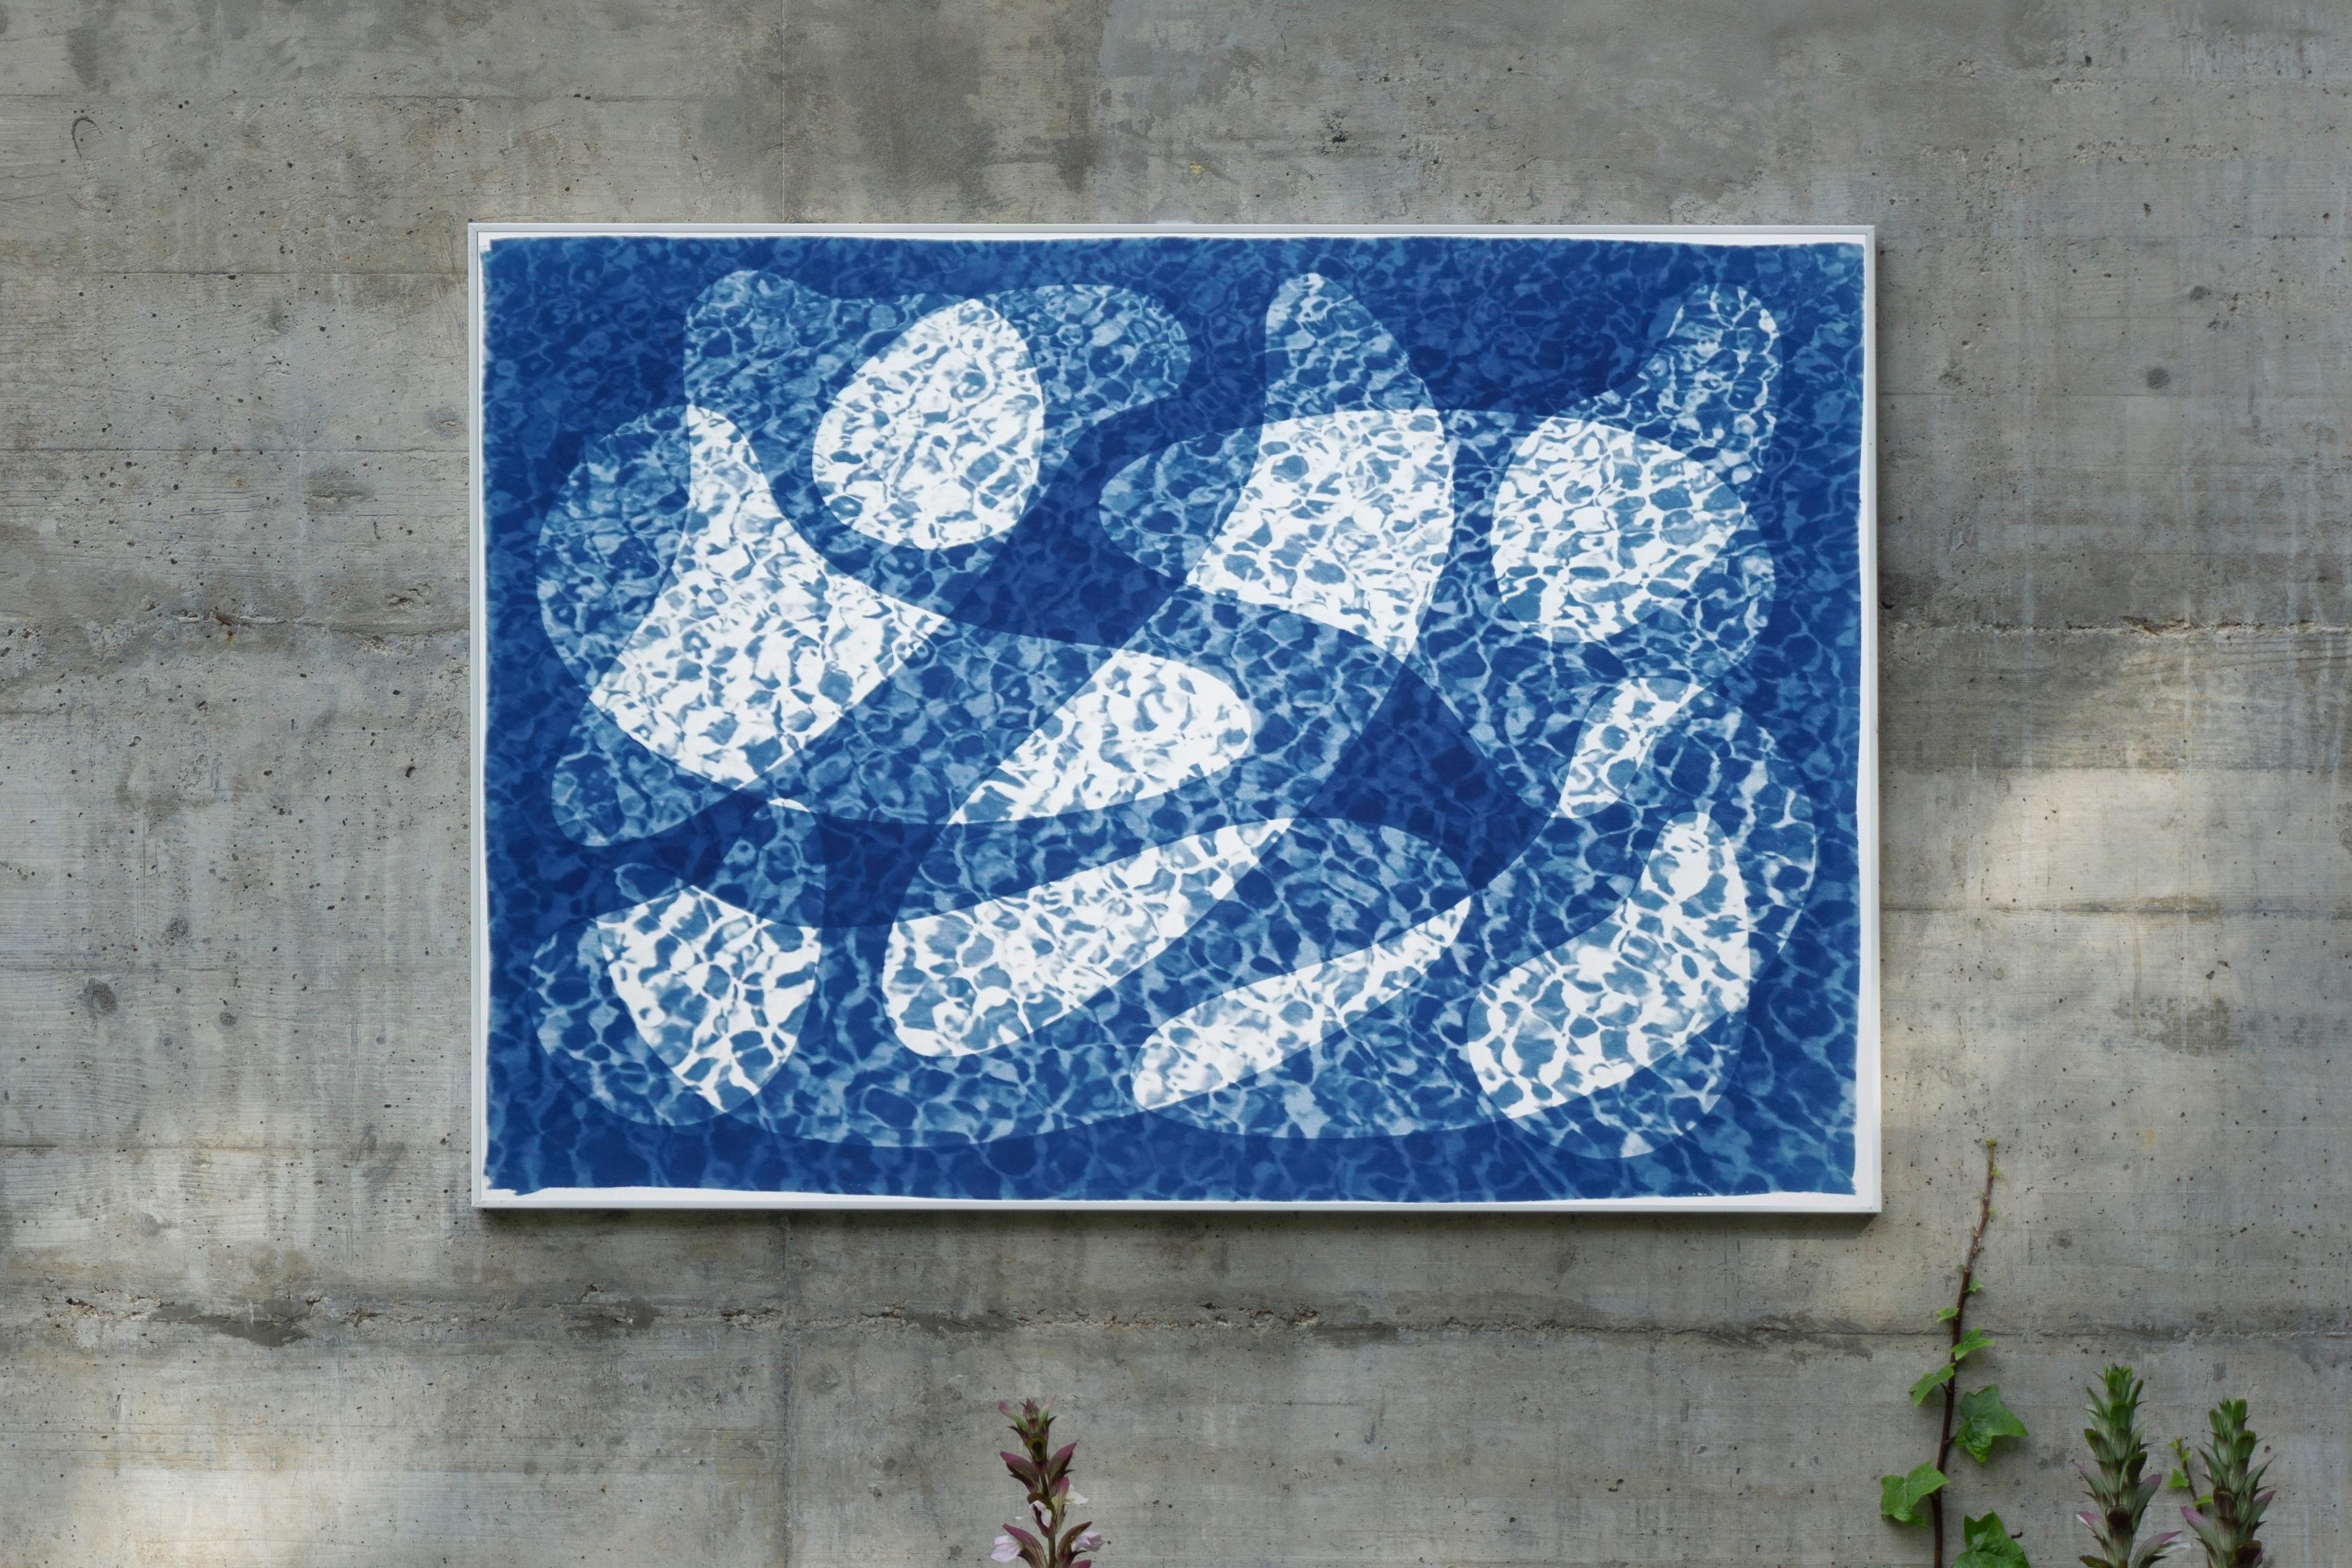 This is an exclusive handprinted unique cyanotype that takes its inspiration from the mid-century modern shapes.
It's made by layering paper cutouts and different exposures using uv-light. 

Details:
+ Title: Fish Swimming Below Water I
+ Year: